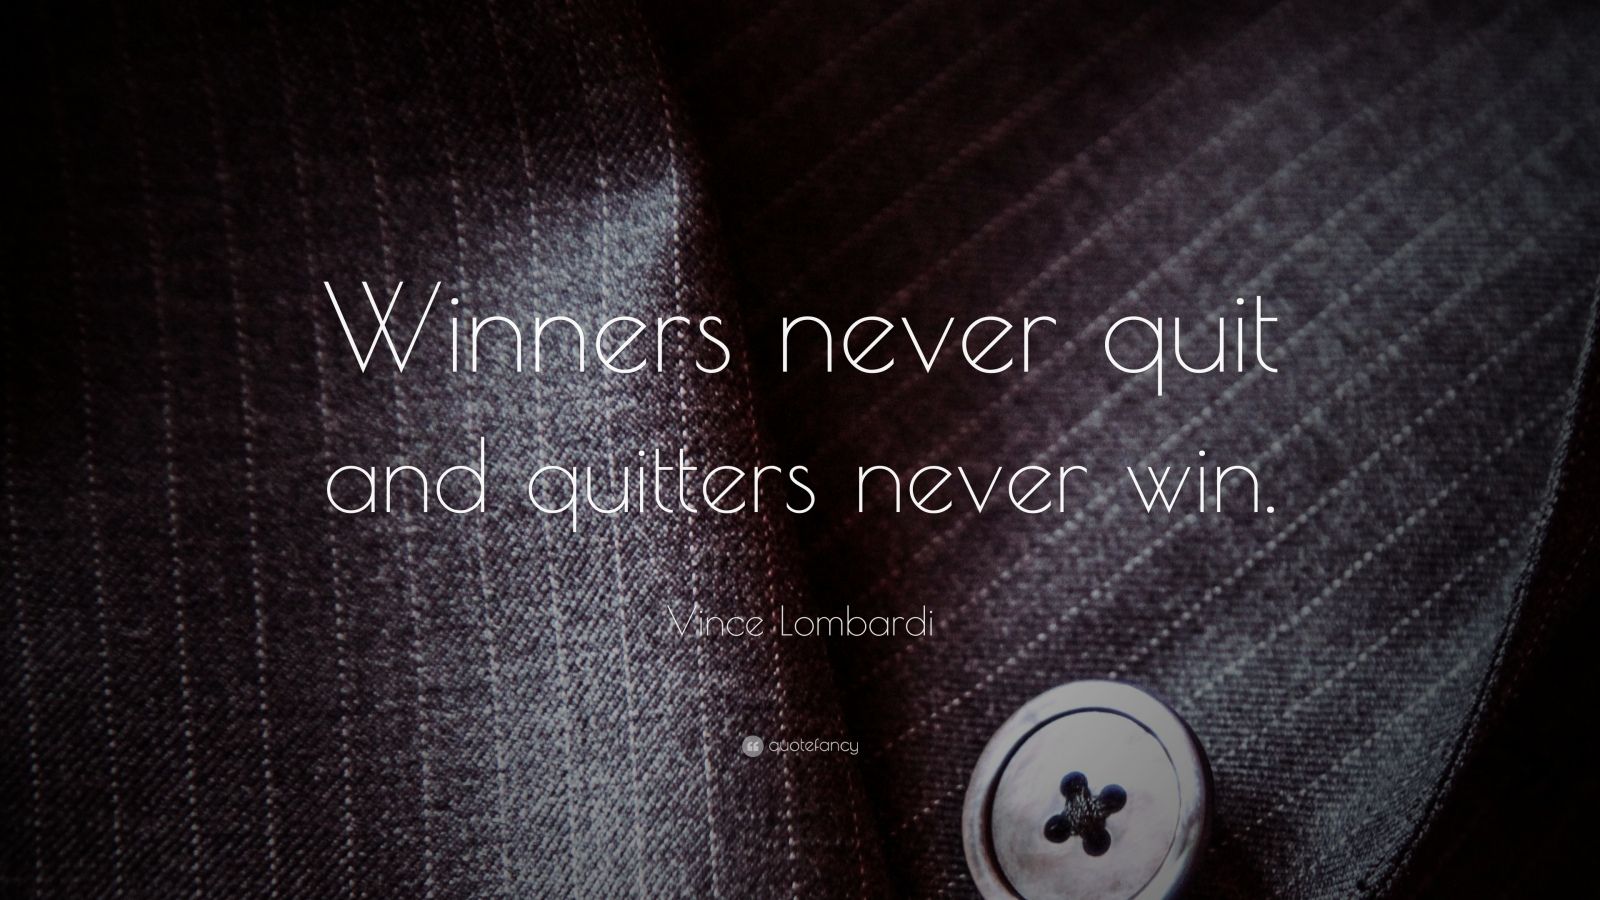 Vince Lombardi Quote: “Winners never quit and quitters never win.” (25